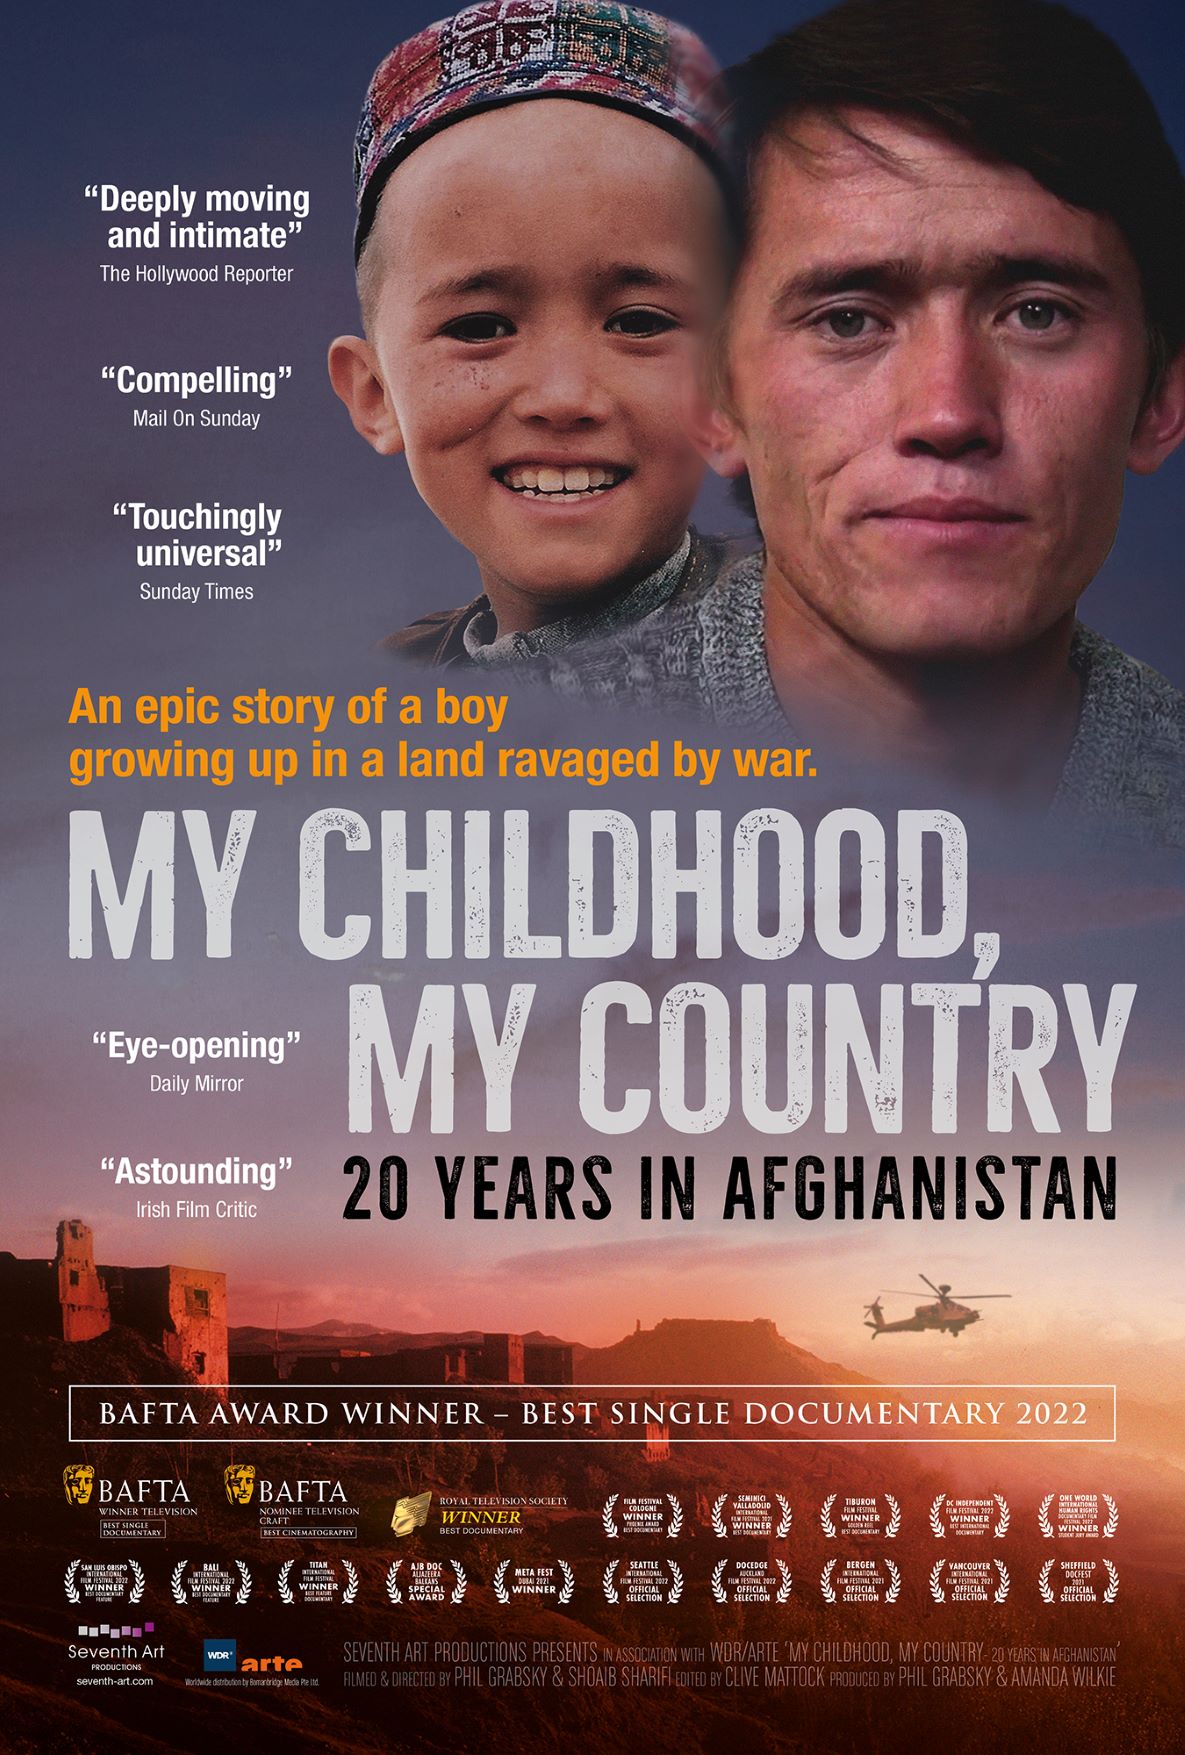 My Childhood My Country - 20 Years in Afghanistan